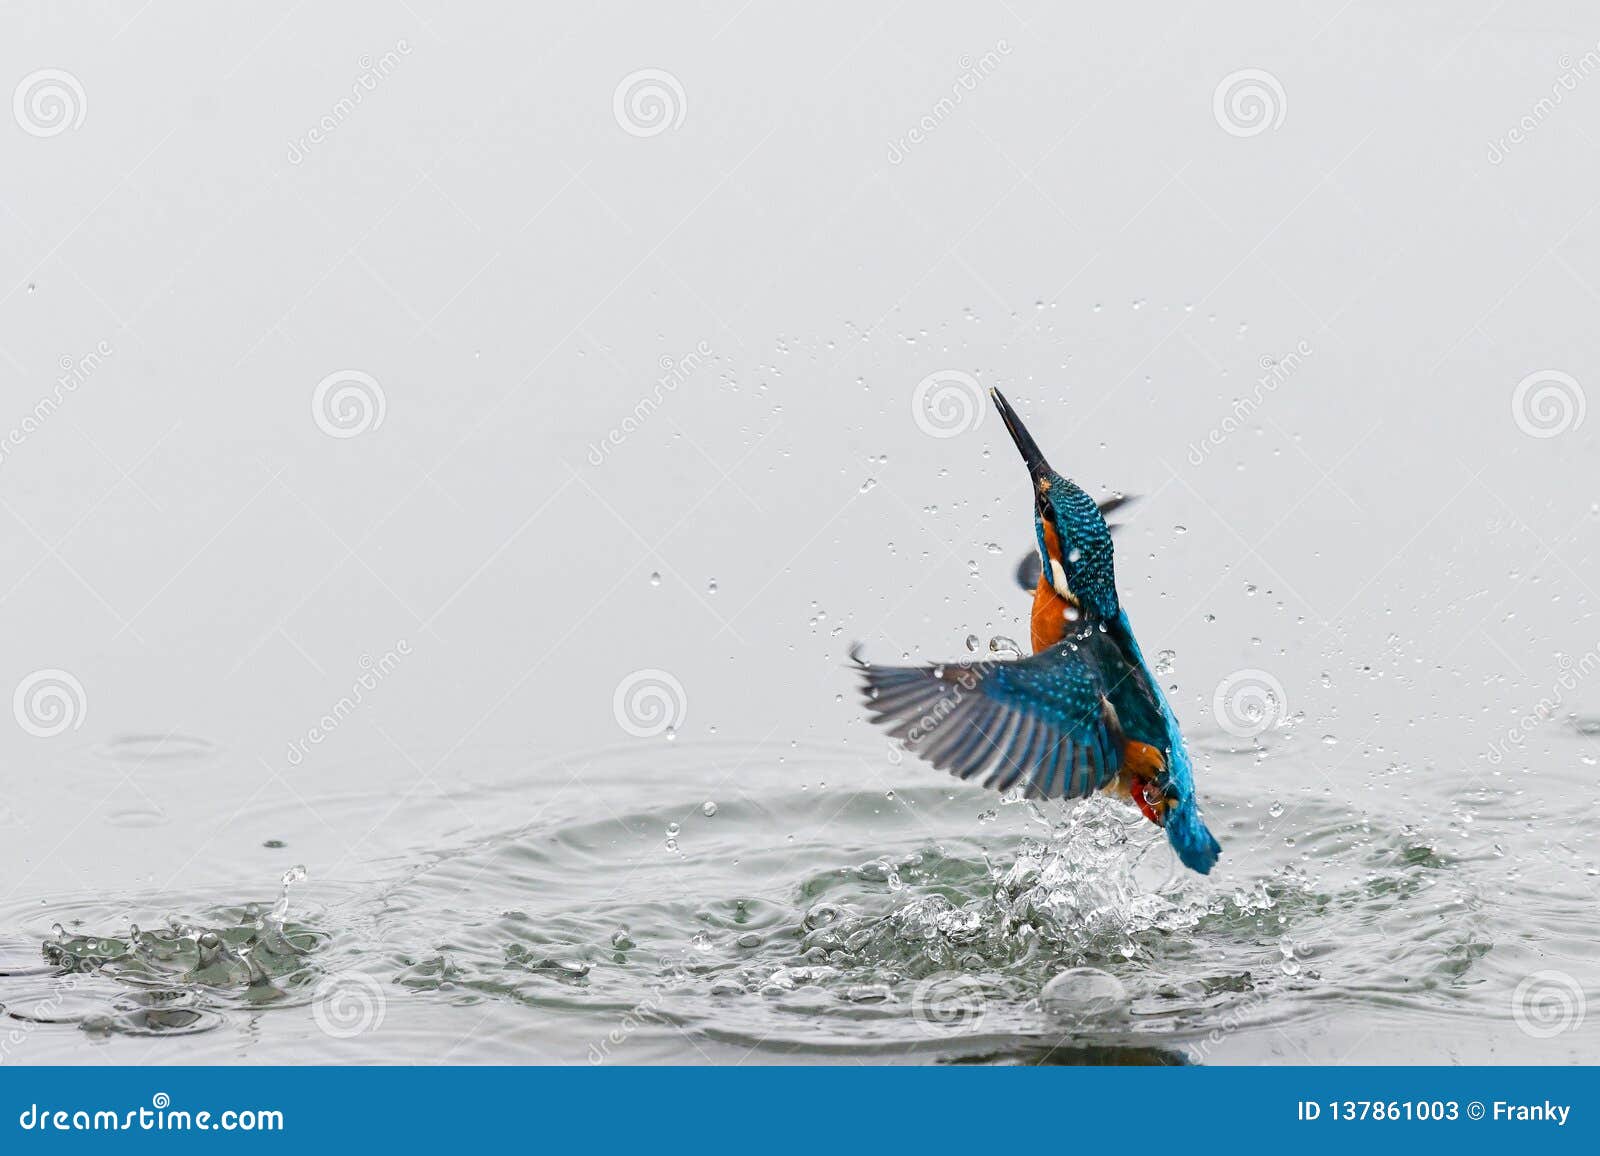 action photo of a kingfisher coming out from water